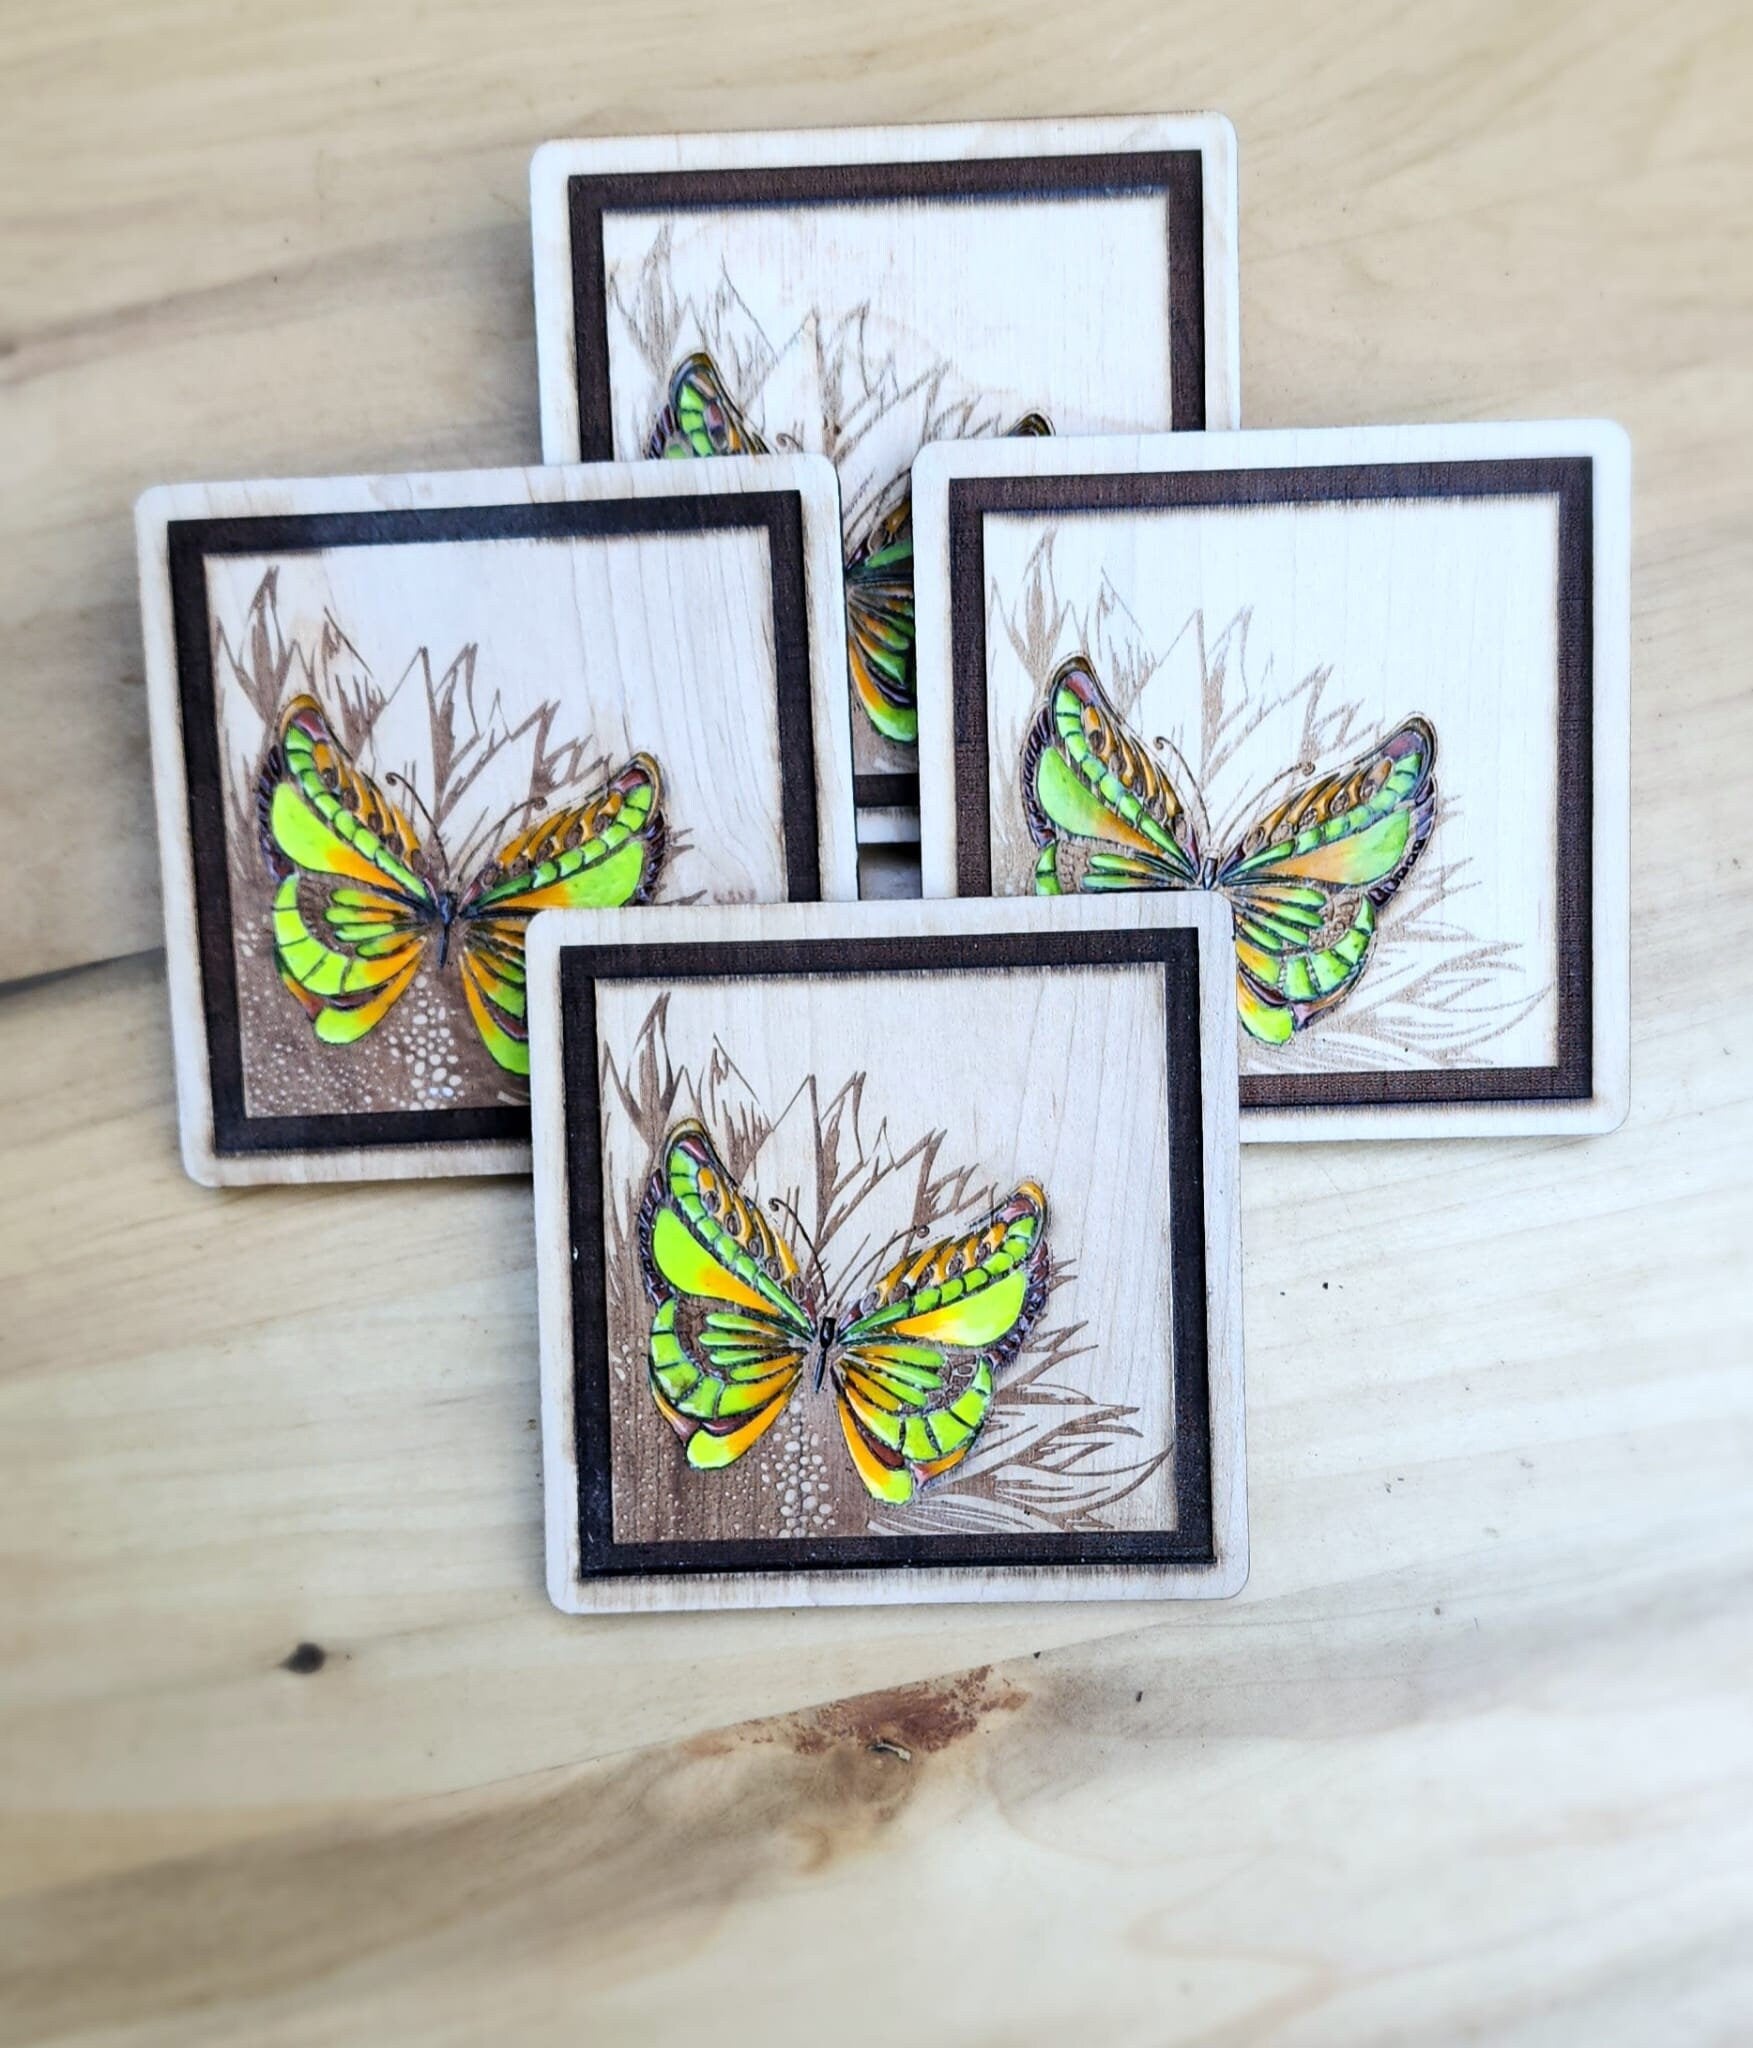 Wood And Resin Coaster, Butterfly Coaster, Porta vasos , Coaster gift, Anniversary Gift, Wedding Gift , Occasion Gift, Resin, Wood Art .